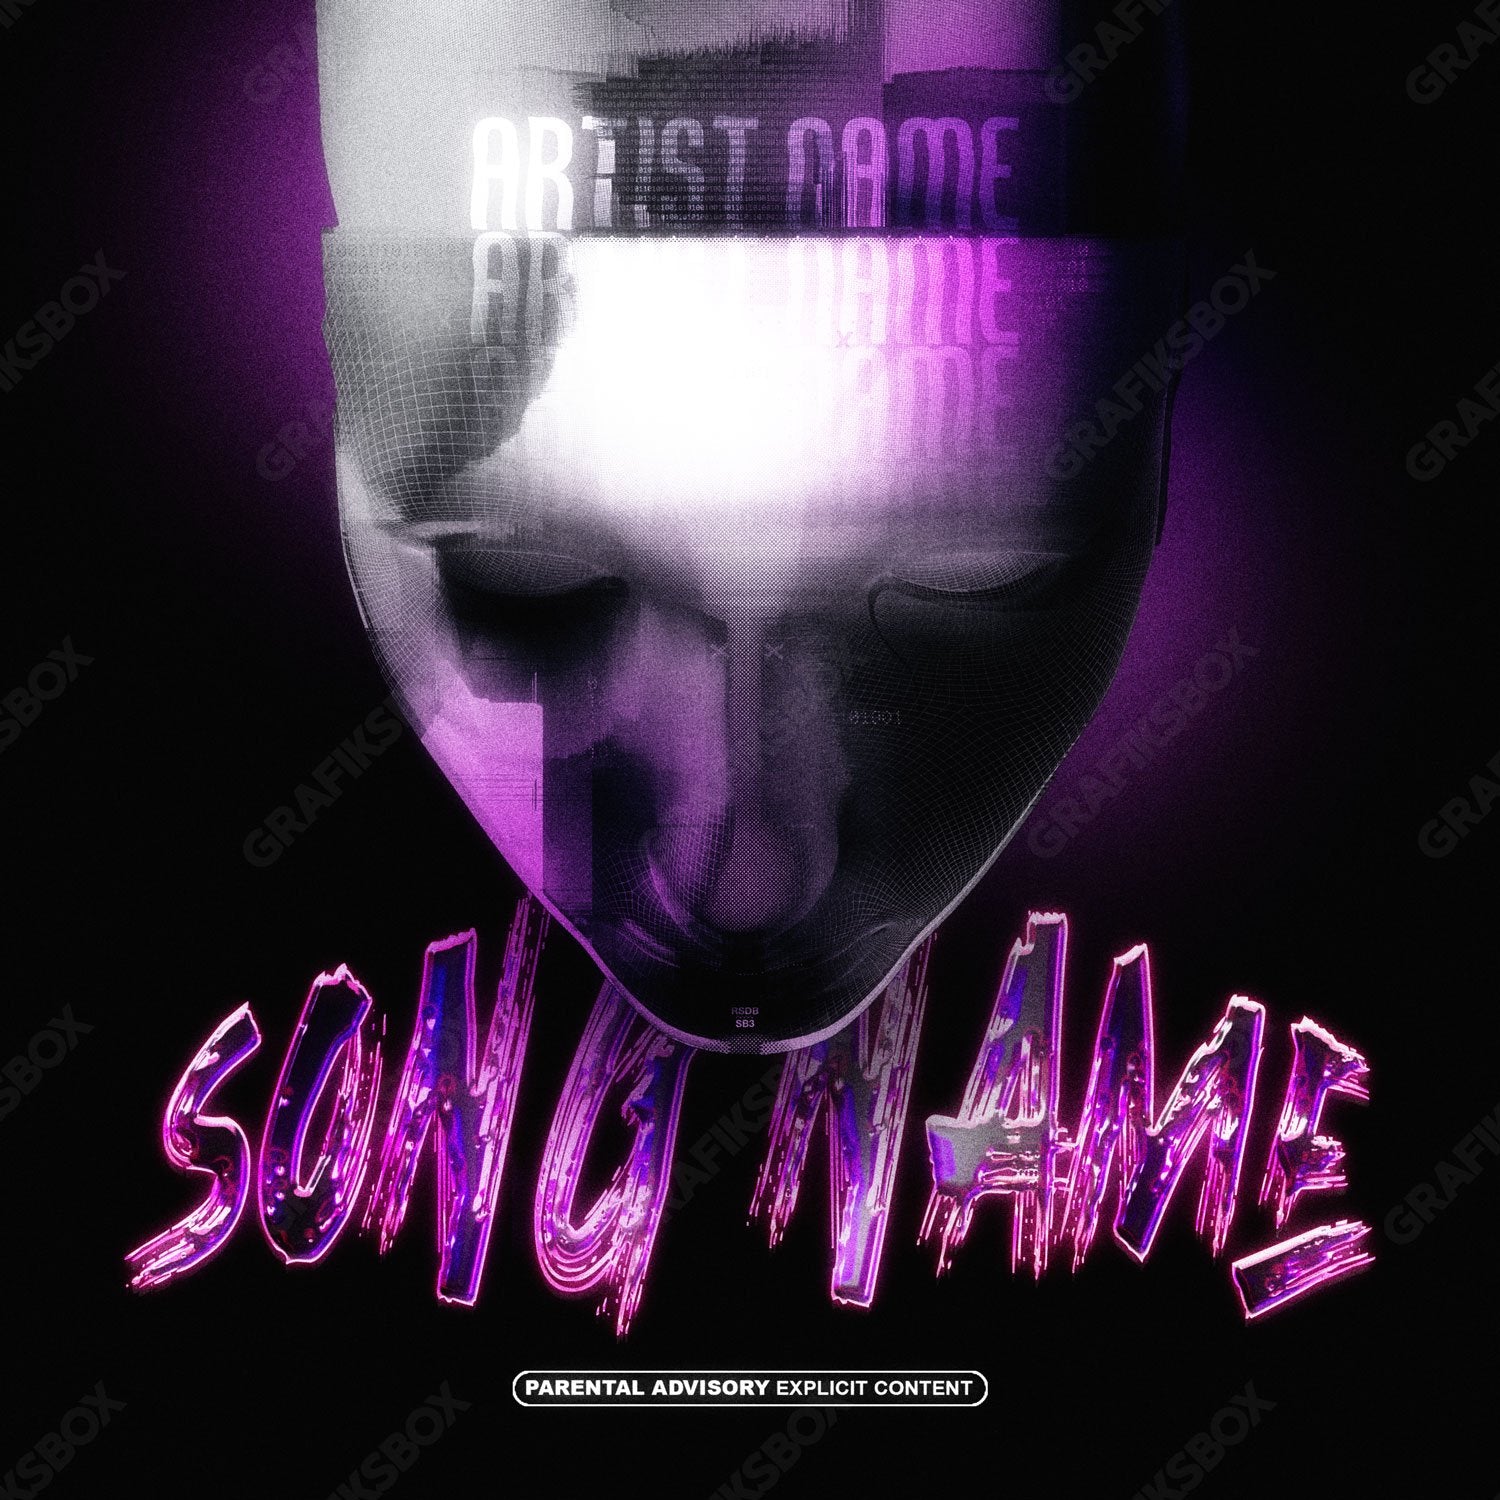 Android premade cover art